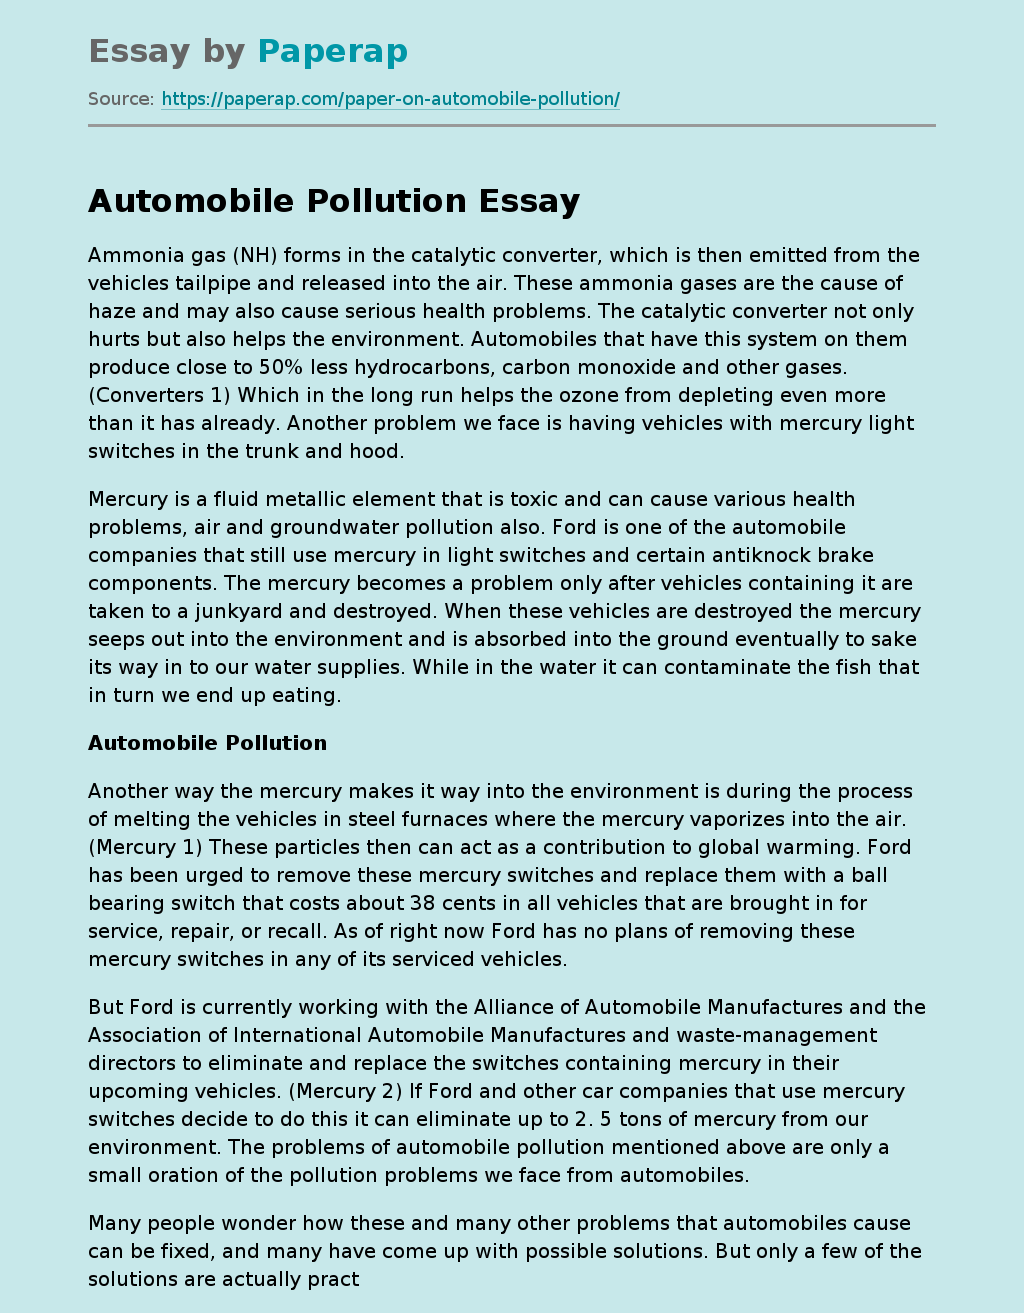 Impact of Automobile Pollution on the Environment